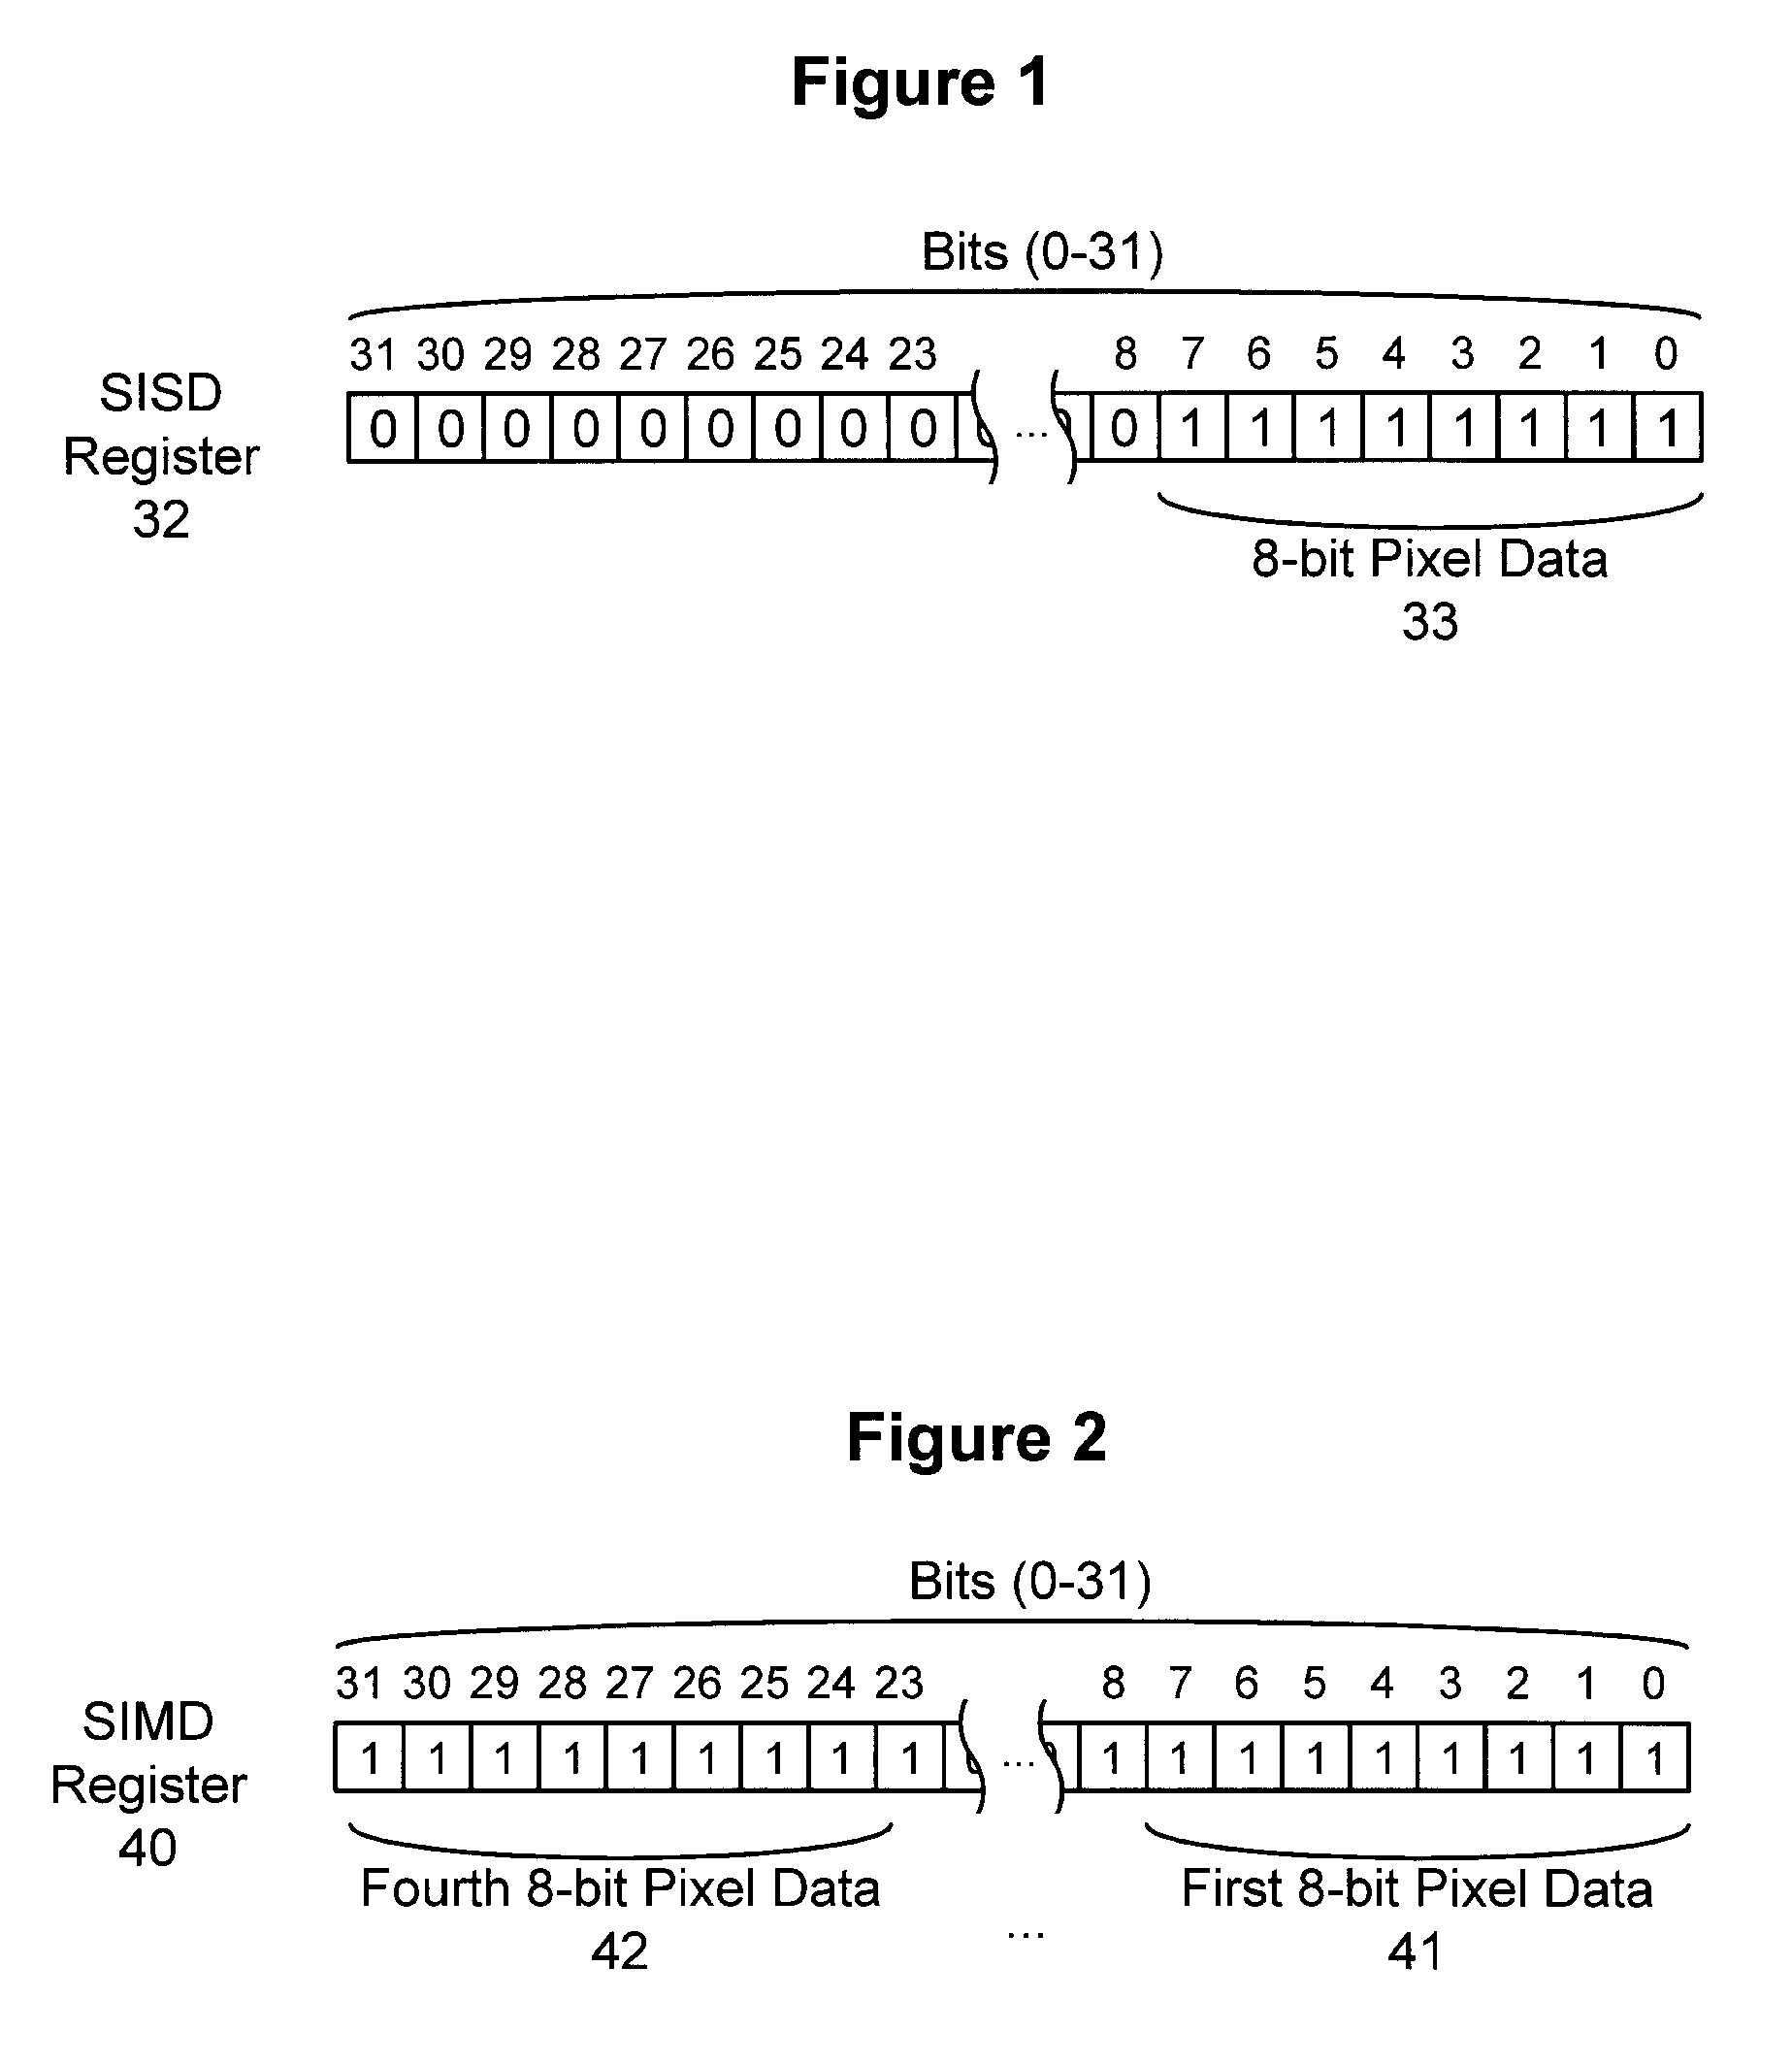 Apparatus, computer program product and associated methodology for video analytics